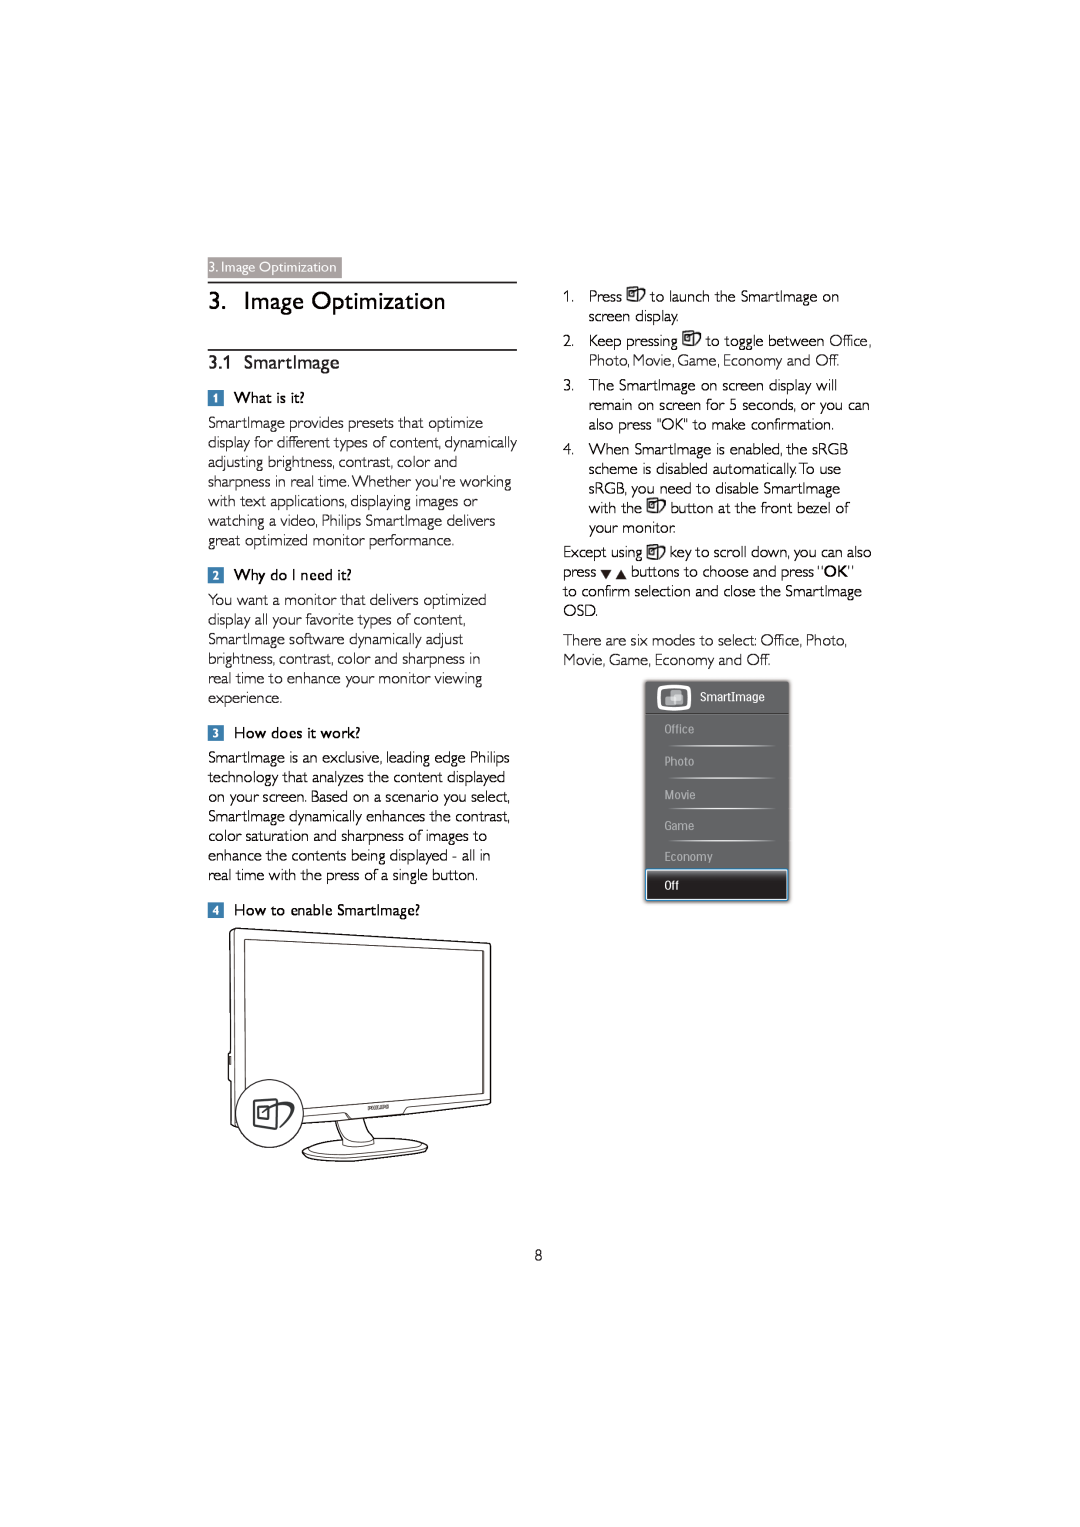 Philips 273P3Q user manual What is it?, Why do I need it?, How does it work?, How to enable SmartImage?, your monitor 